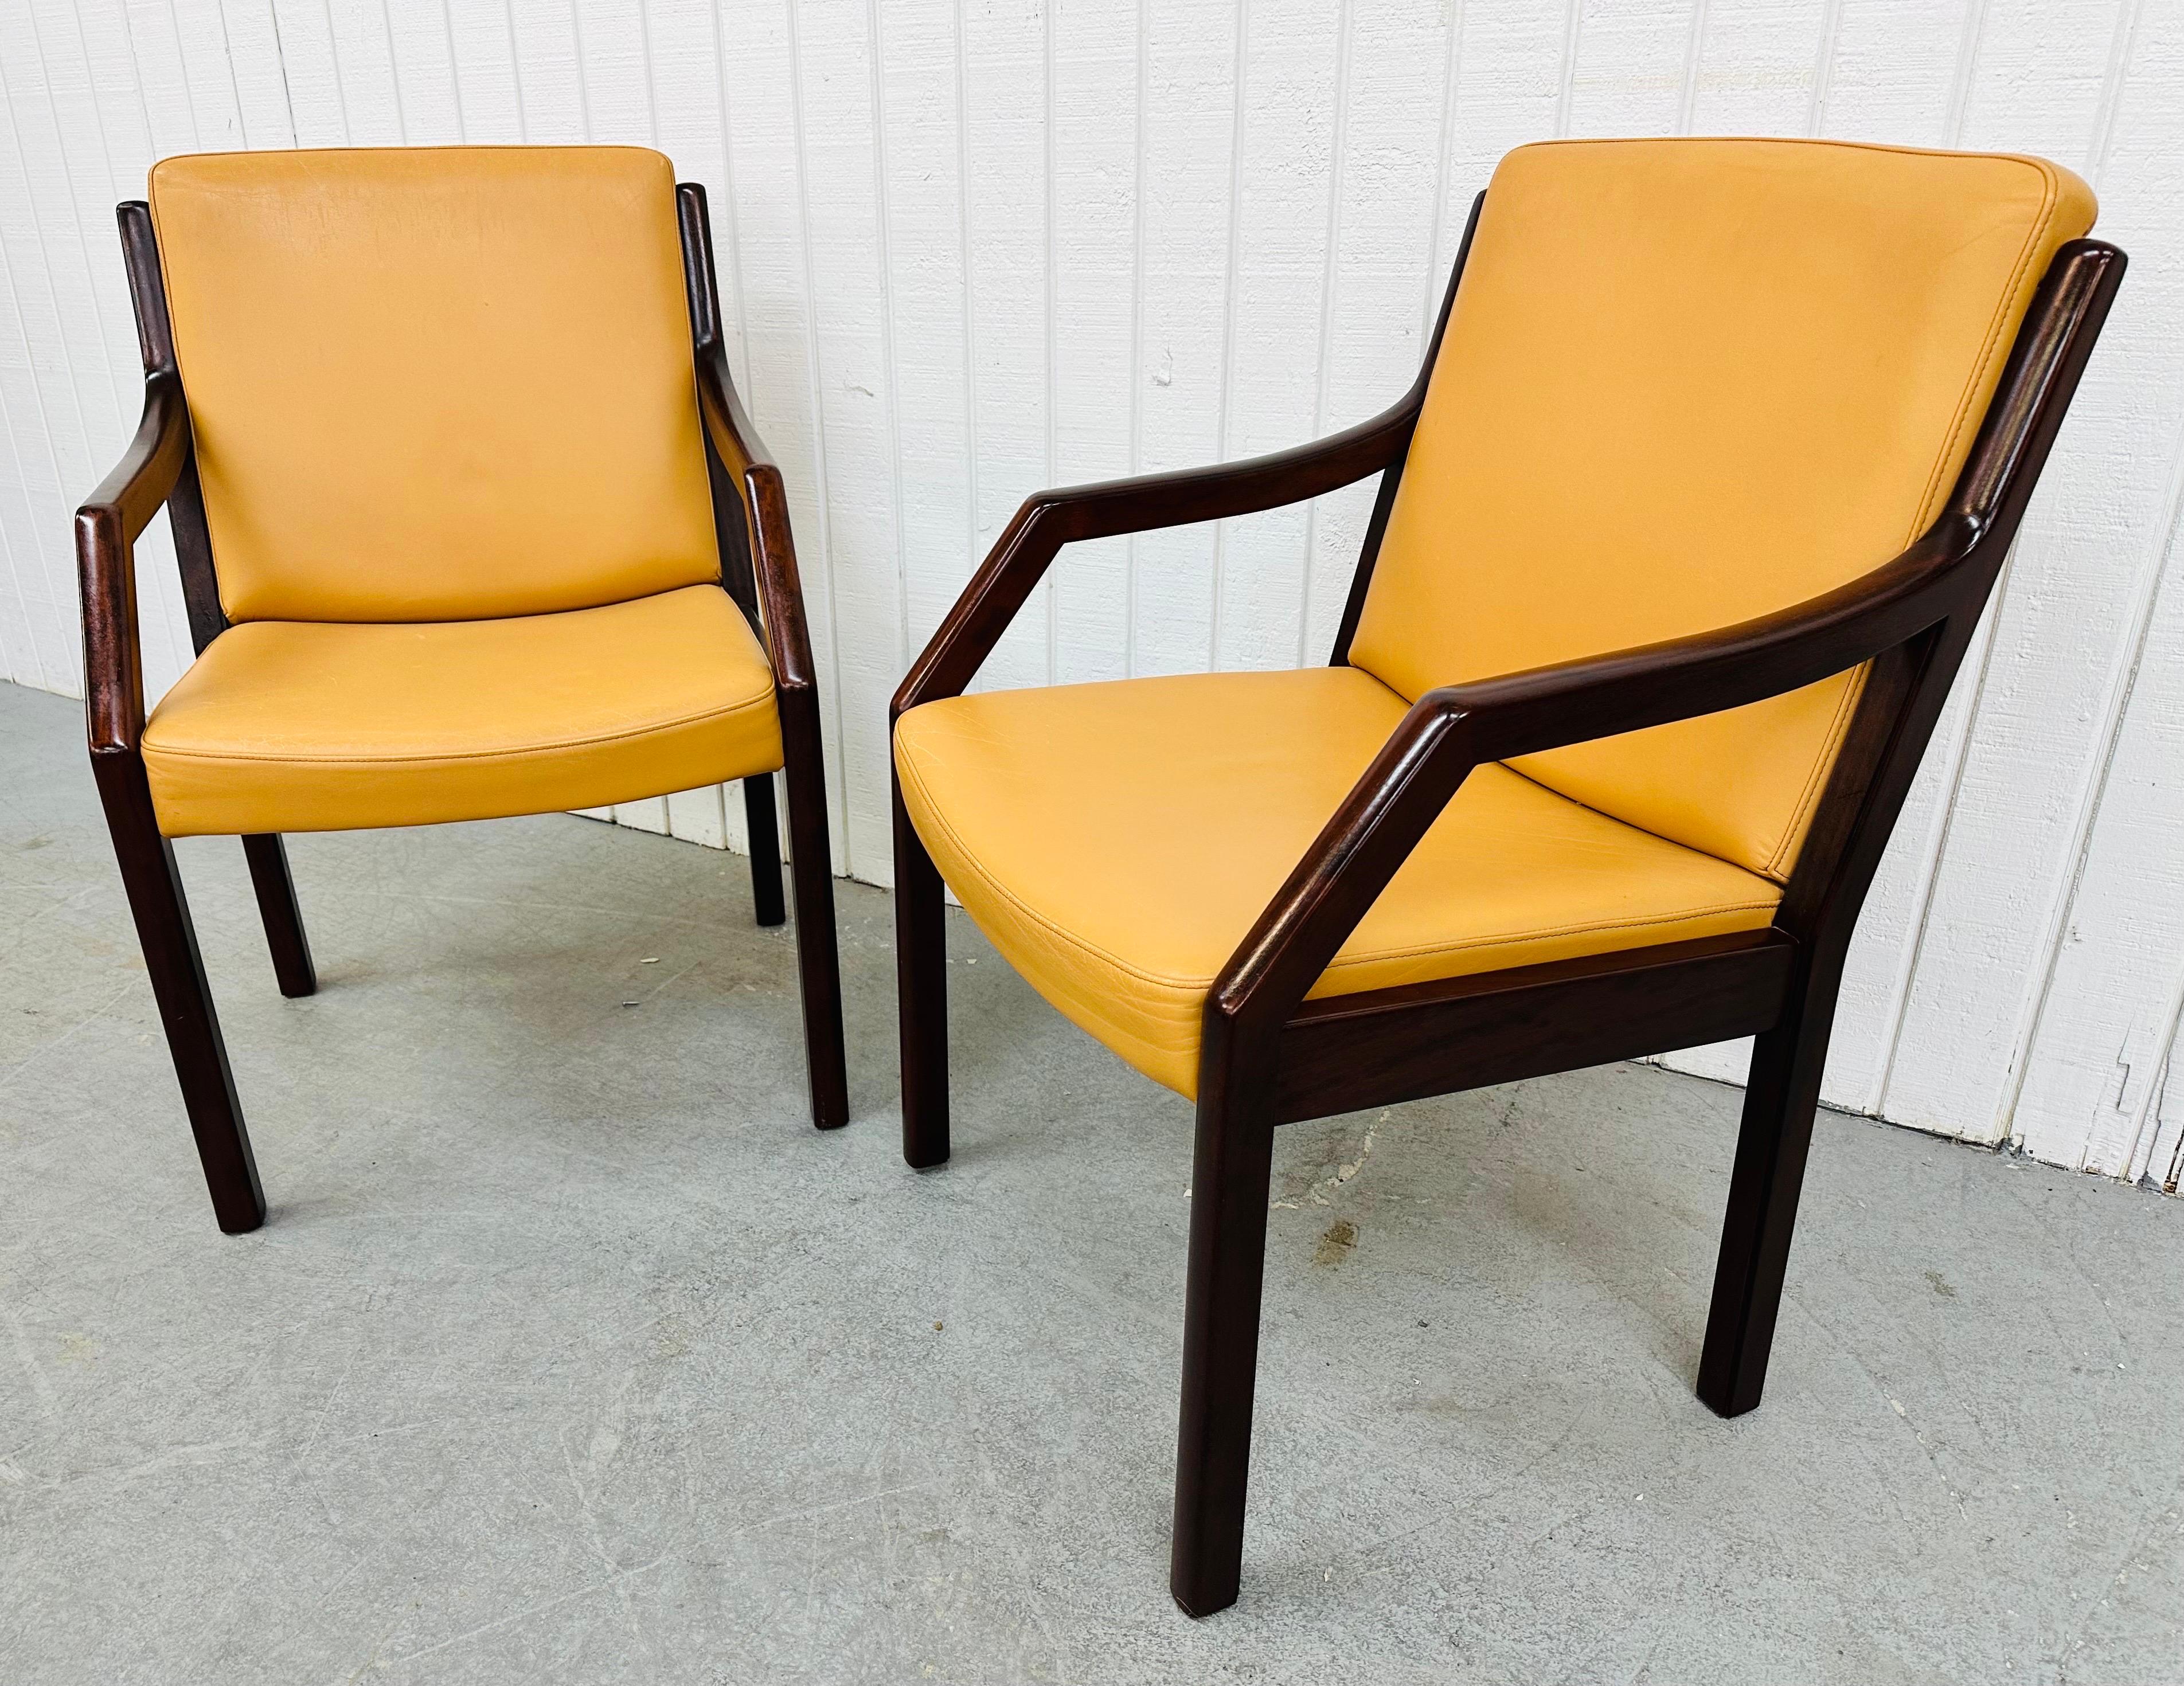 This listing is for a pair of vintage Dunbar Lounge Chairs. Featuring wooden frames, bent arm design, modern legs, golden leather upholstery, and a dark mahogany finish. This is an exceptional combination of quality and design by Dunbar!